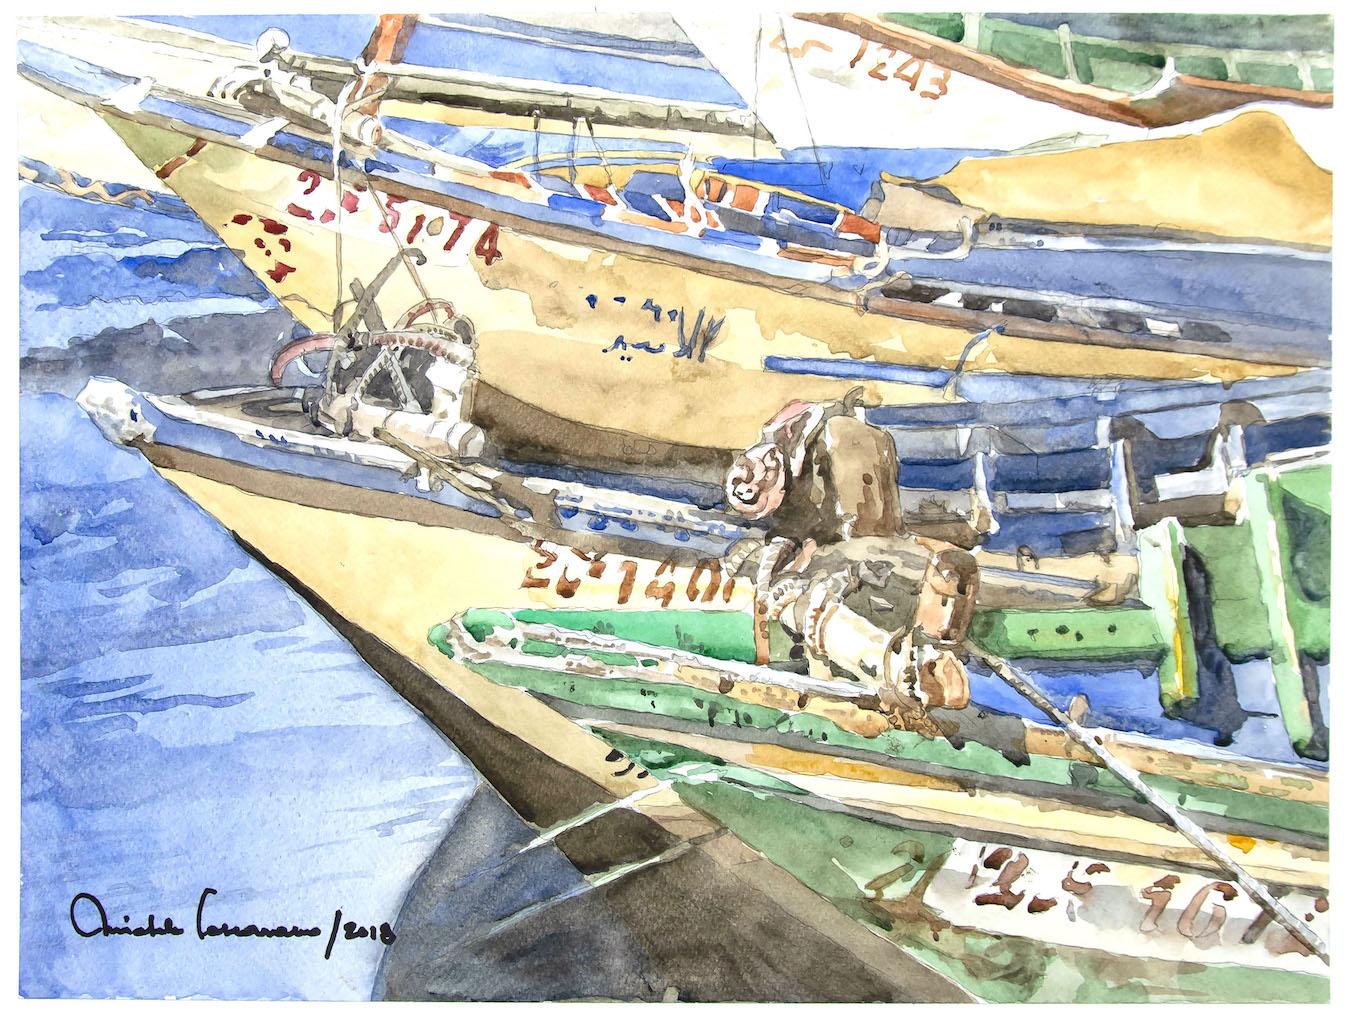 Boats is an original drawing in Watercolor on paper applied on cardboard. realized by Michele Cascarano.

The state of preservation of the artwork is good.

Hand-signed and dated on the lower left, 2018.

Sheet dimension: 40 x50 cm.

The artwork